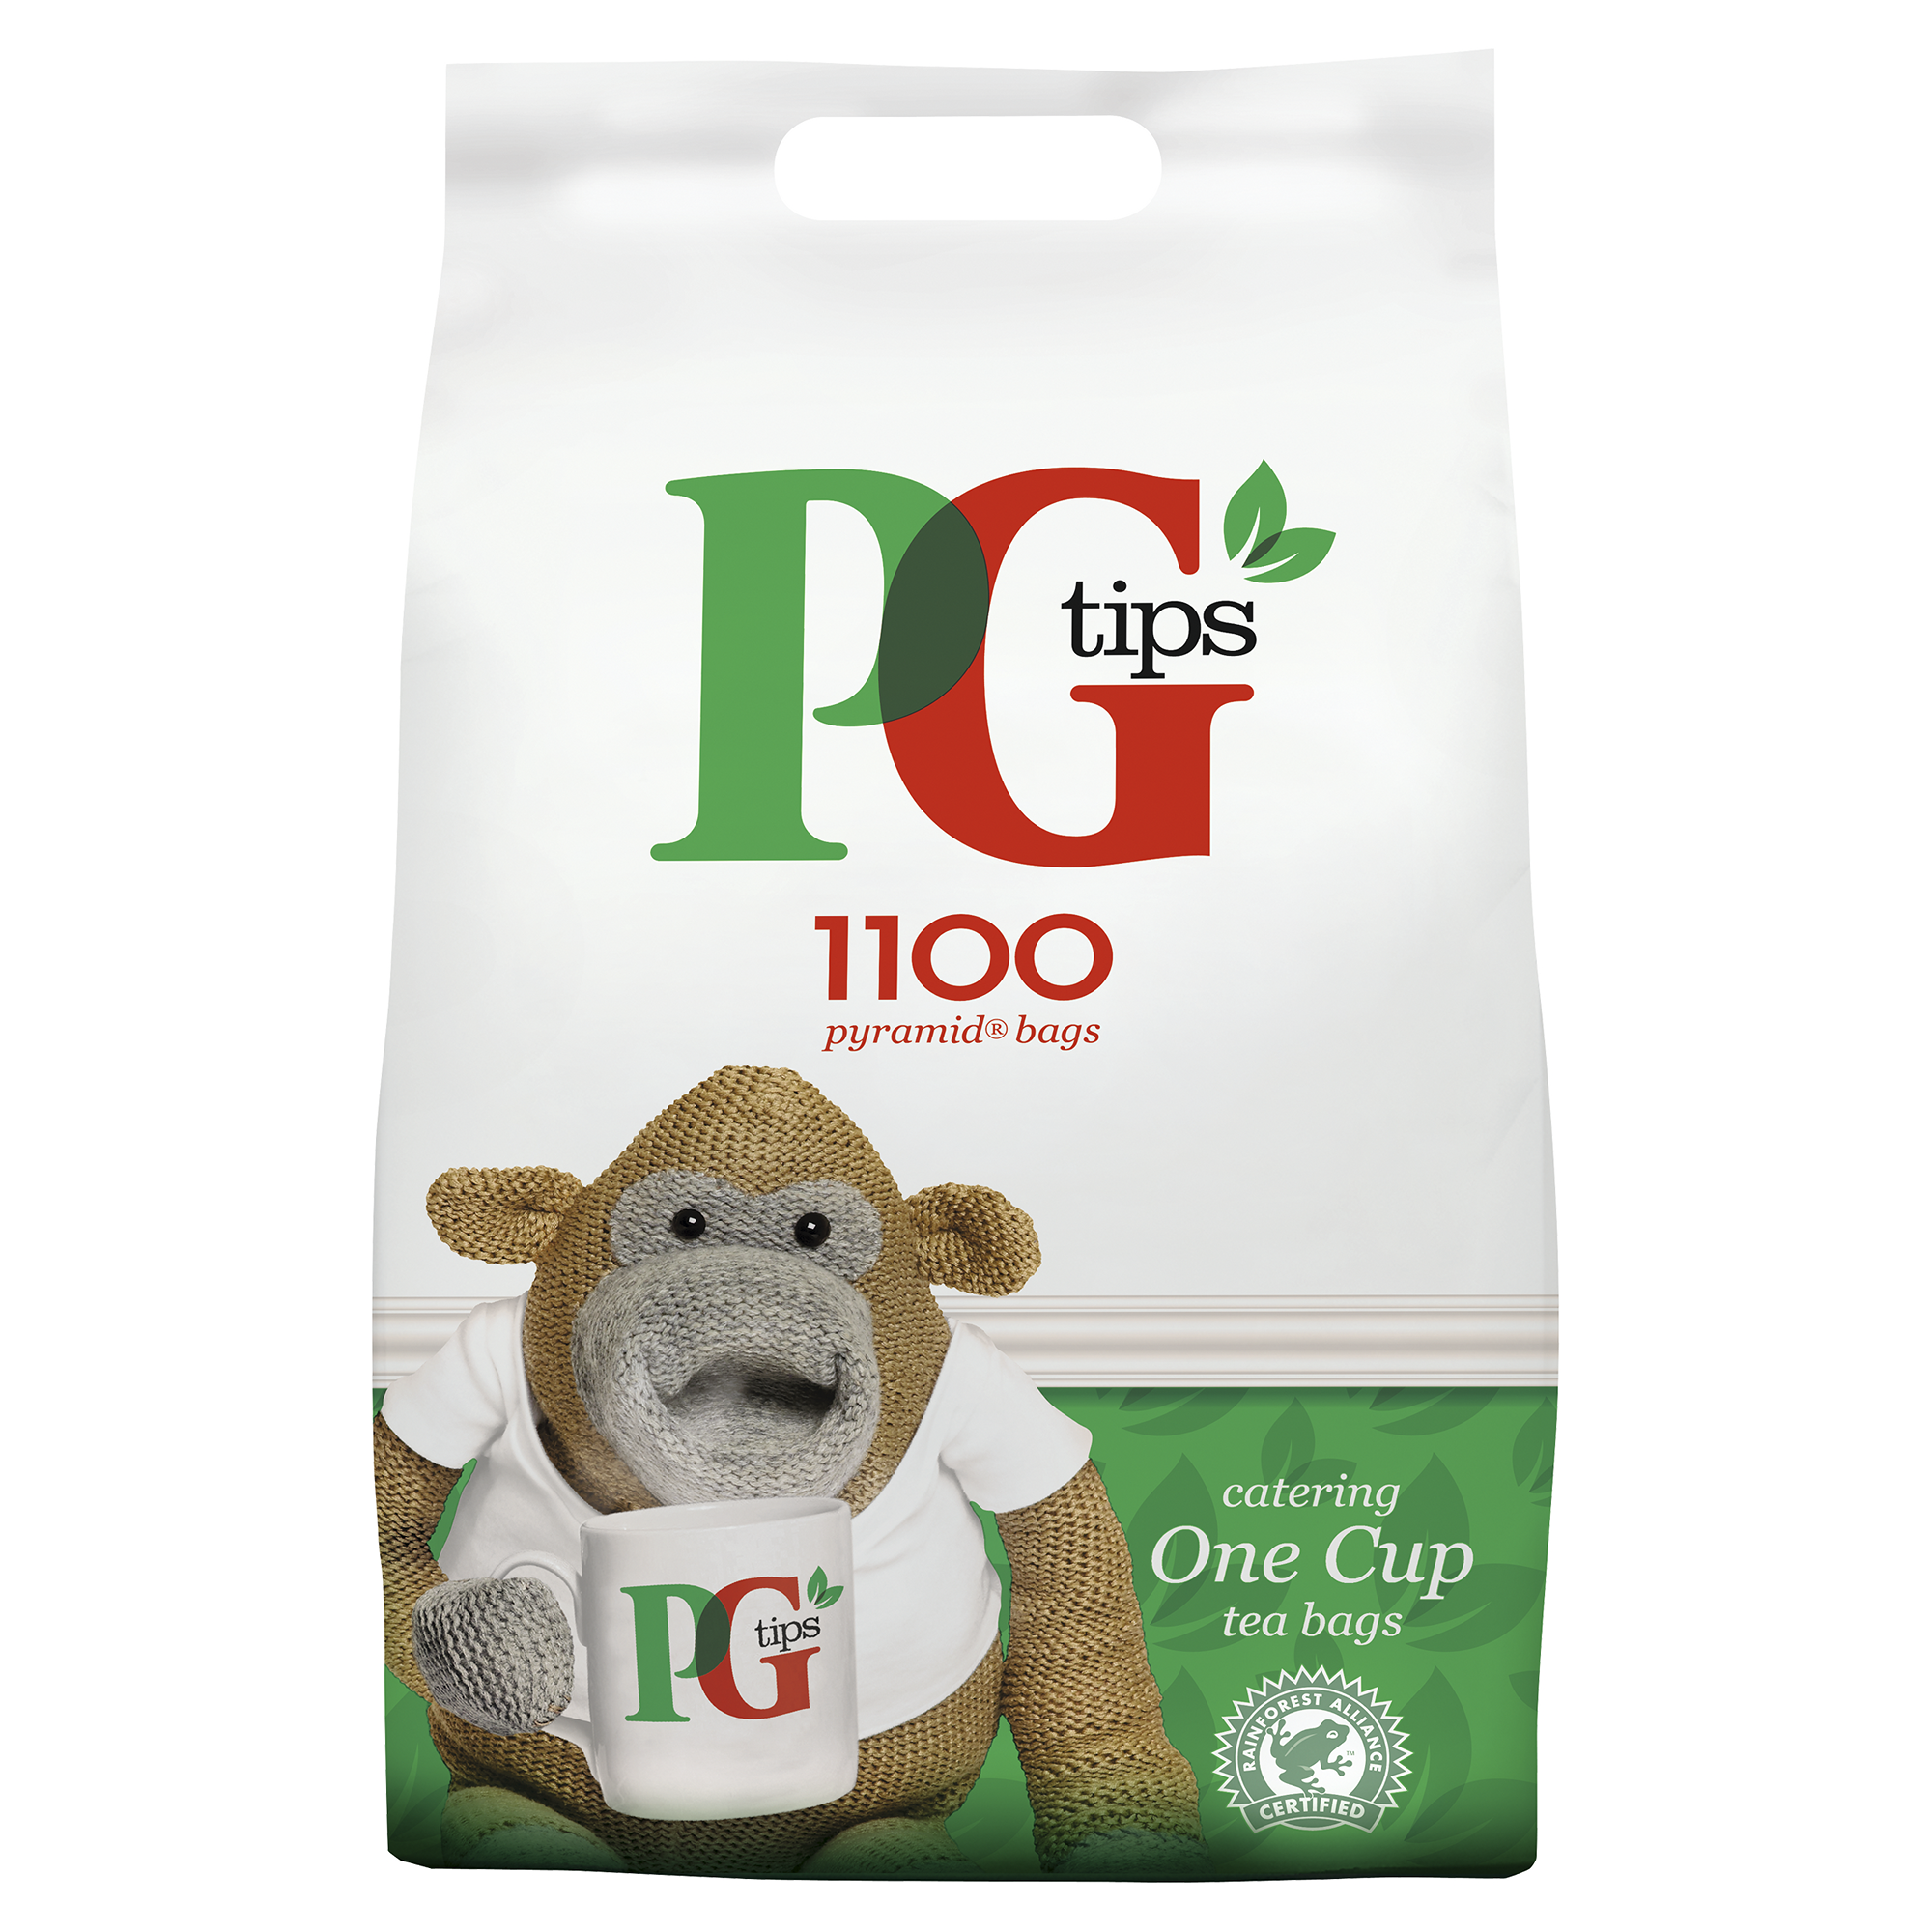 Pg Tips Catering Teabags P1100